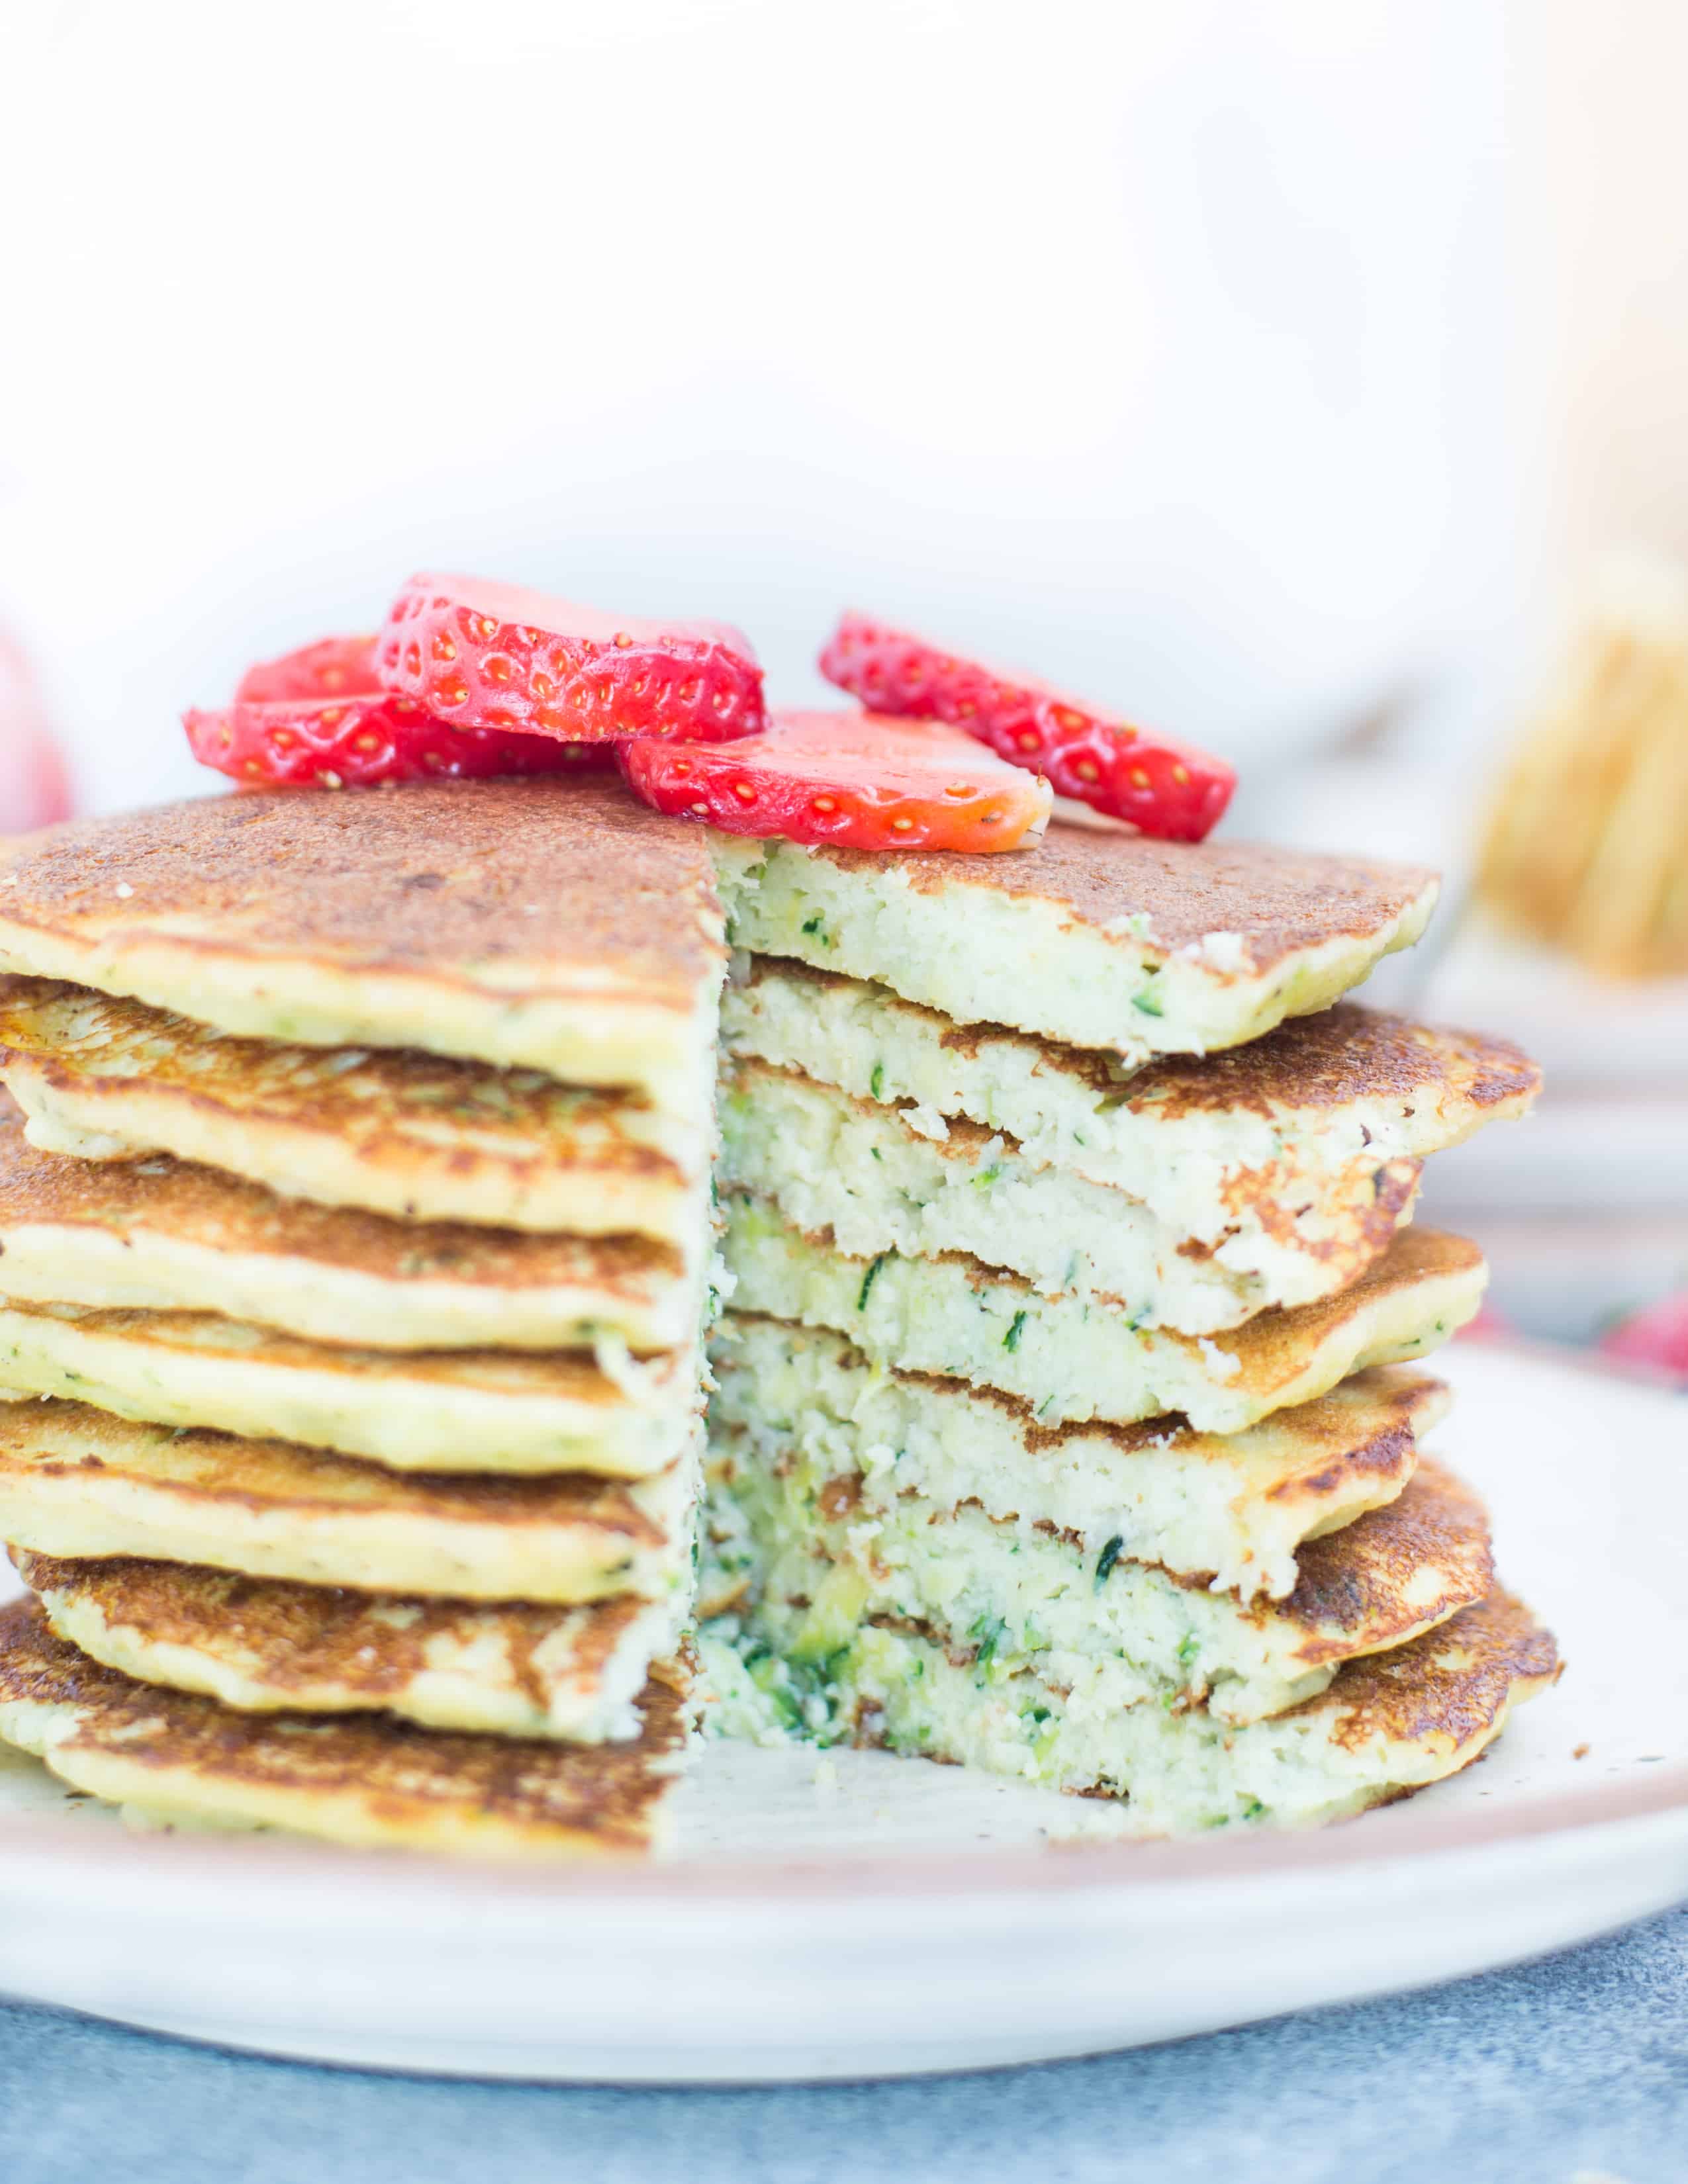 These  Low Carb Coconut Flour Pancakes with zucchini are fluffy, delicious and Keto friendly. Top these pancakes with fresh berries or Honey(Non-Keto) for a delicious breakfast.